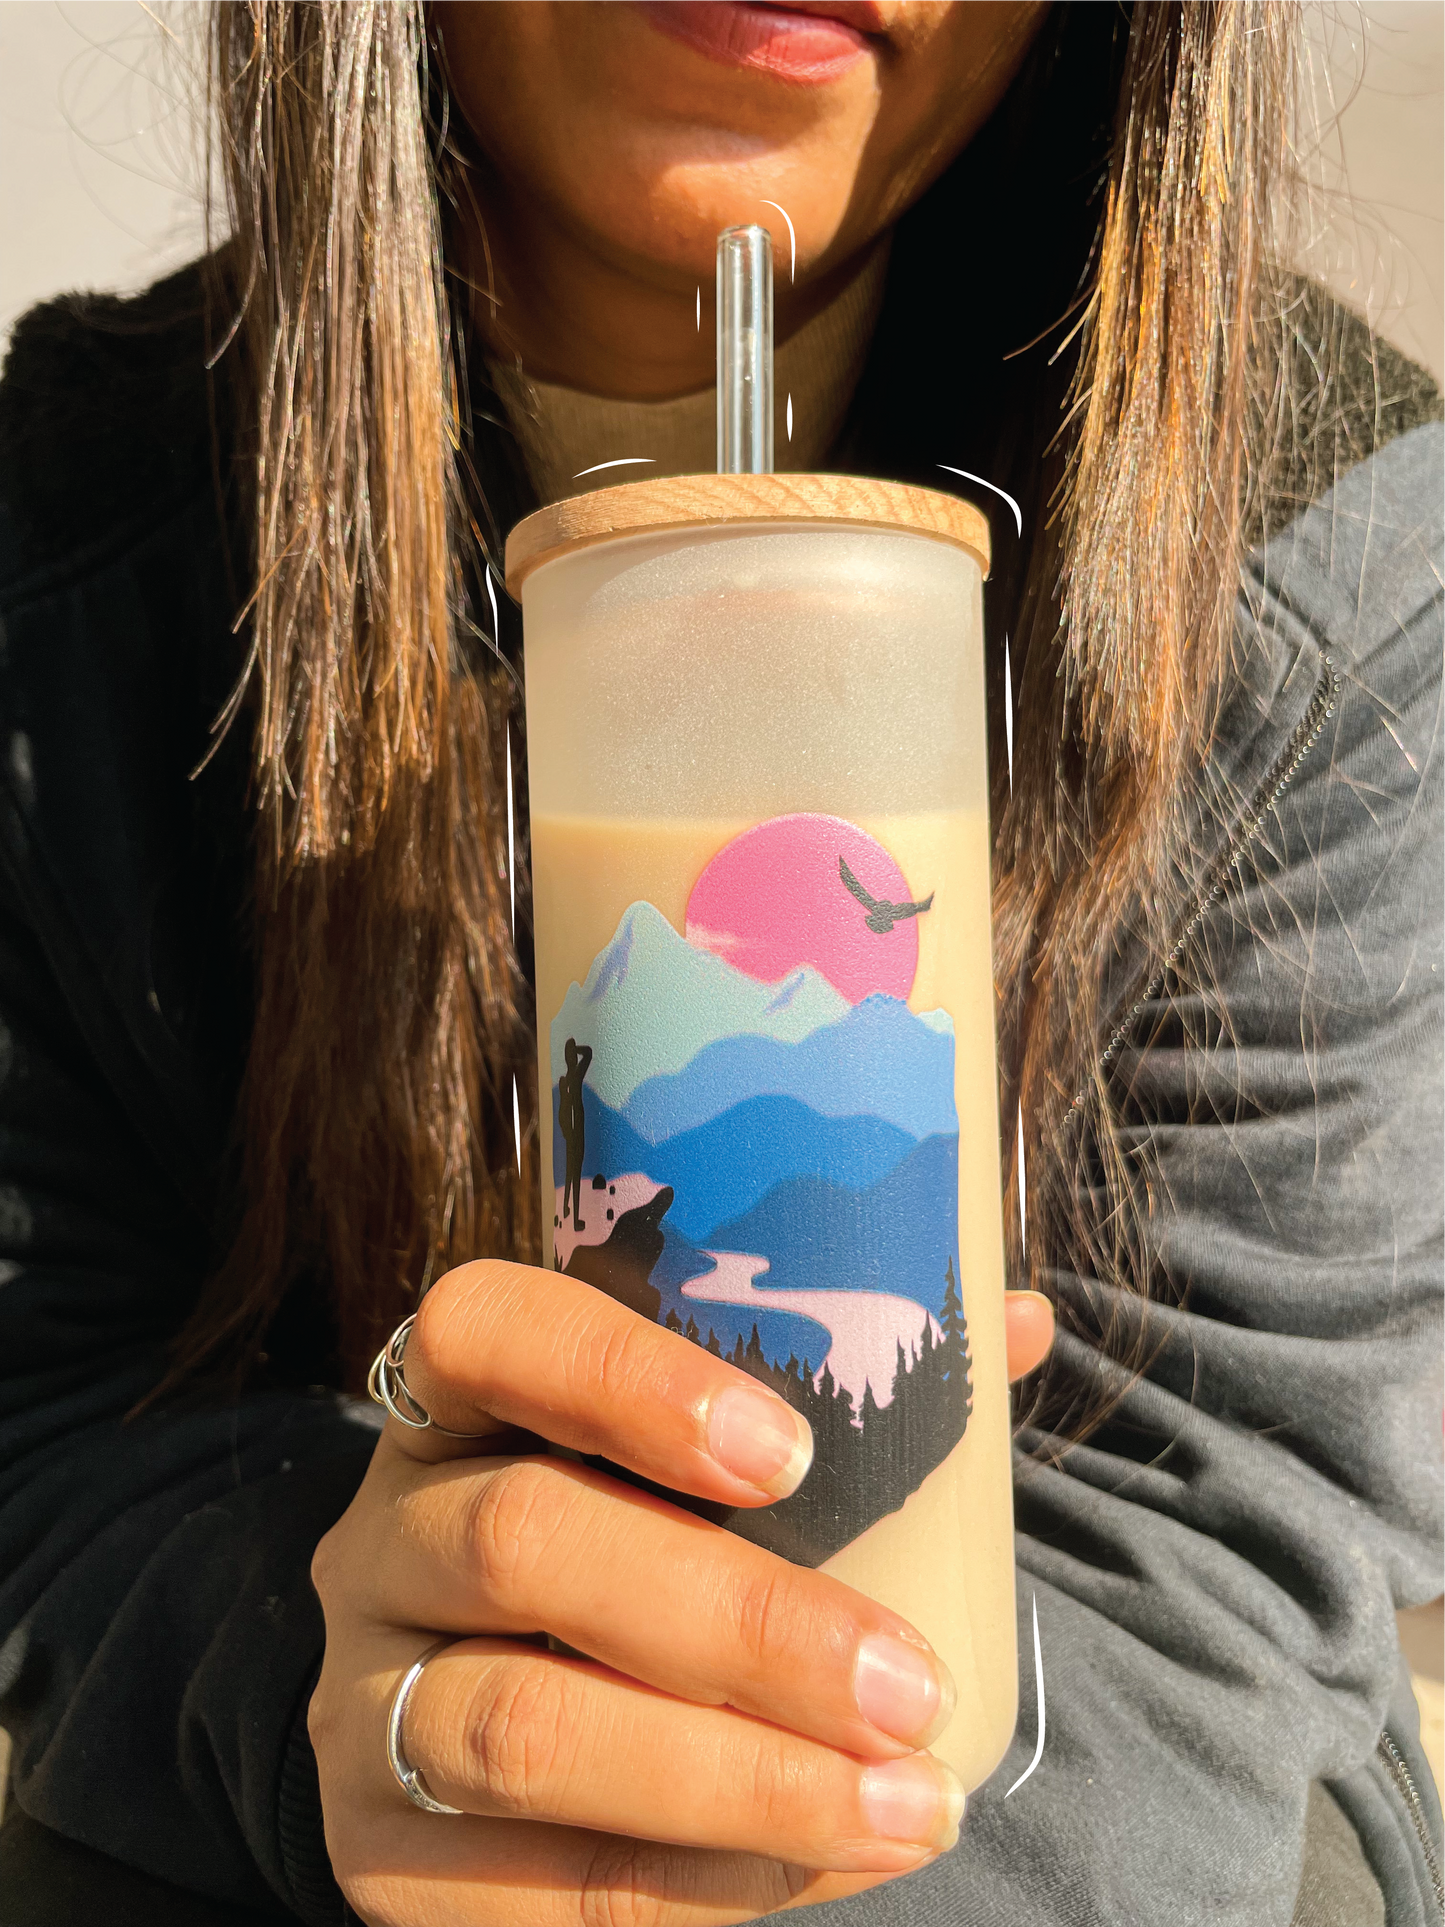 Frosted Grande Sipper 650ml| Heart In Mountain Print| 20oz Tall Tumbler with Straw and Lid